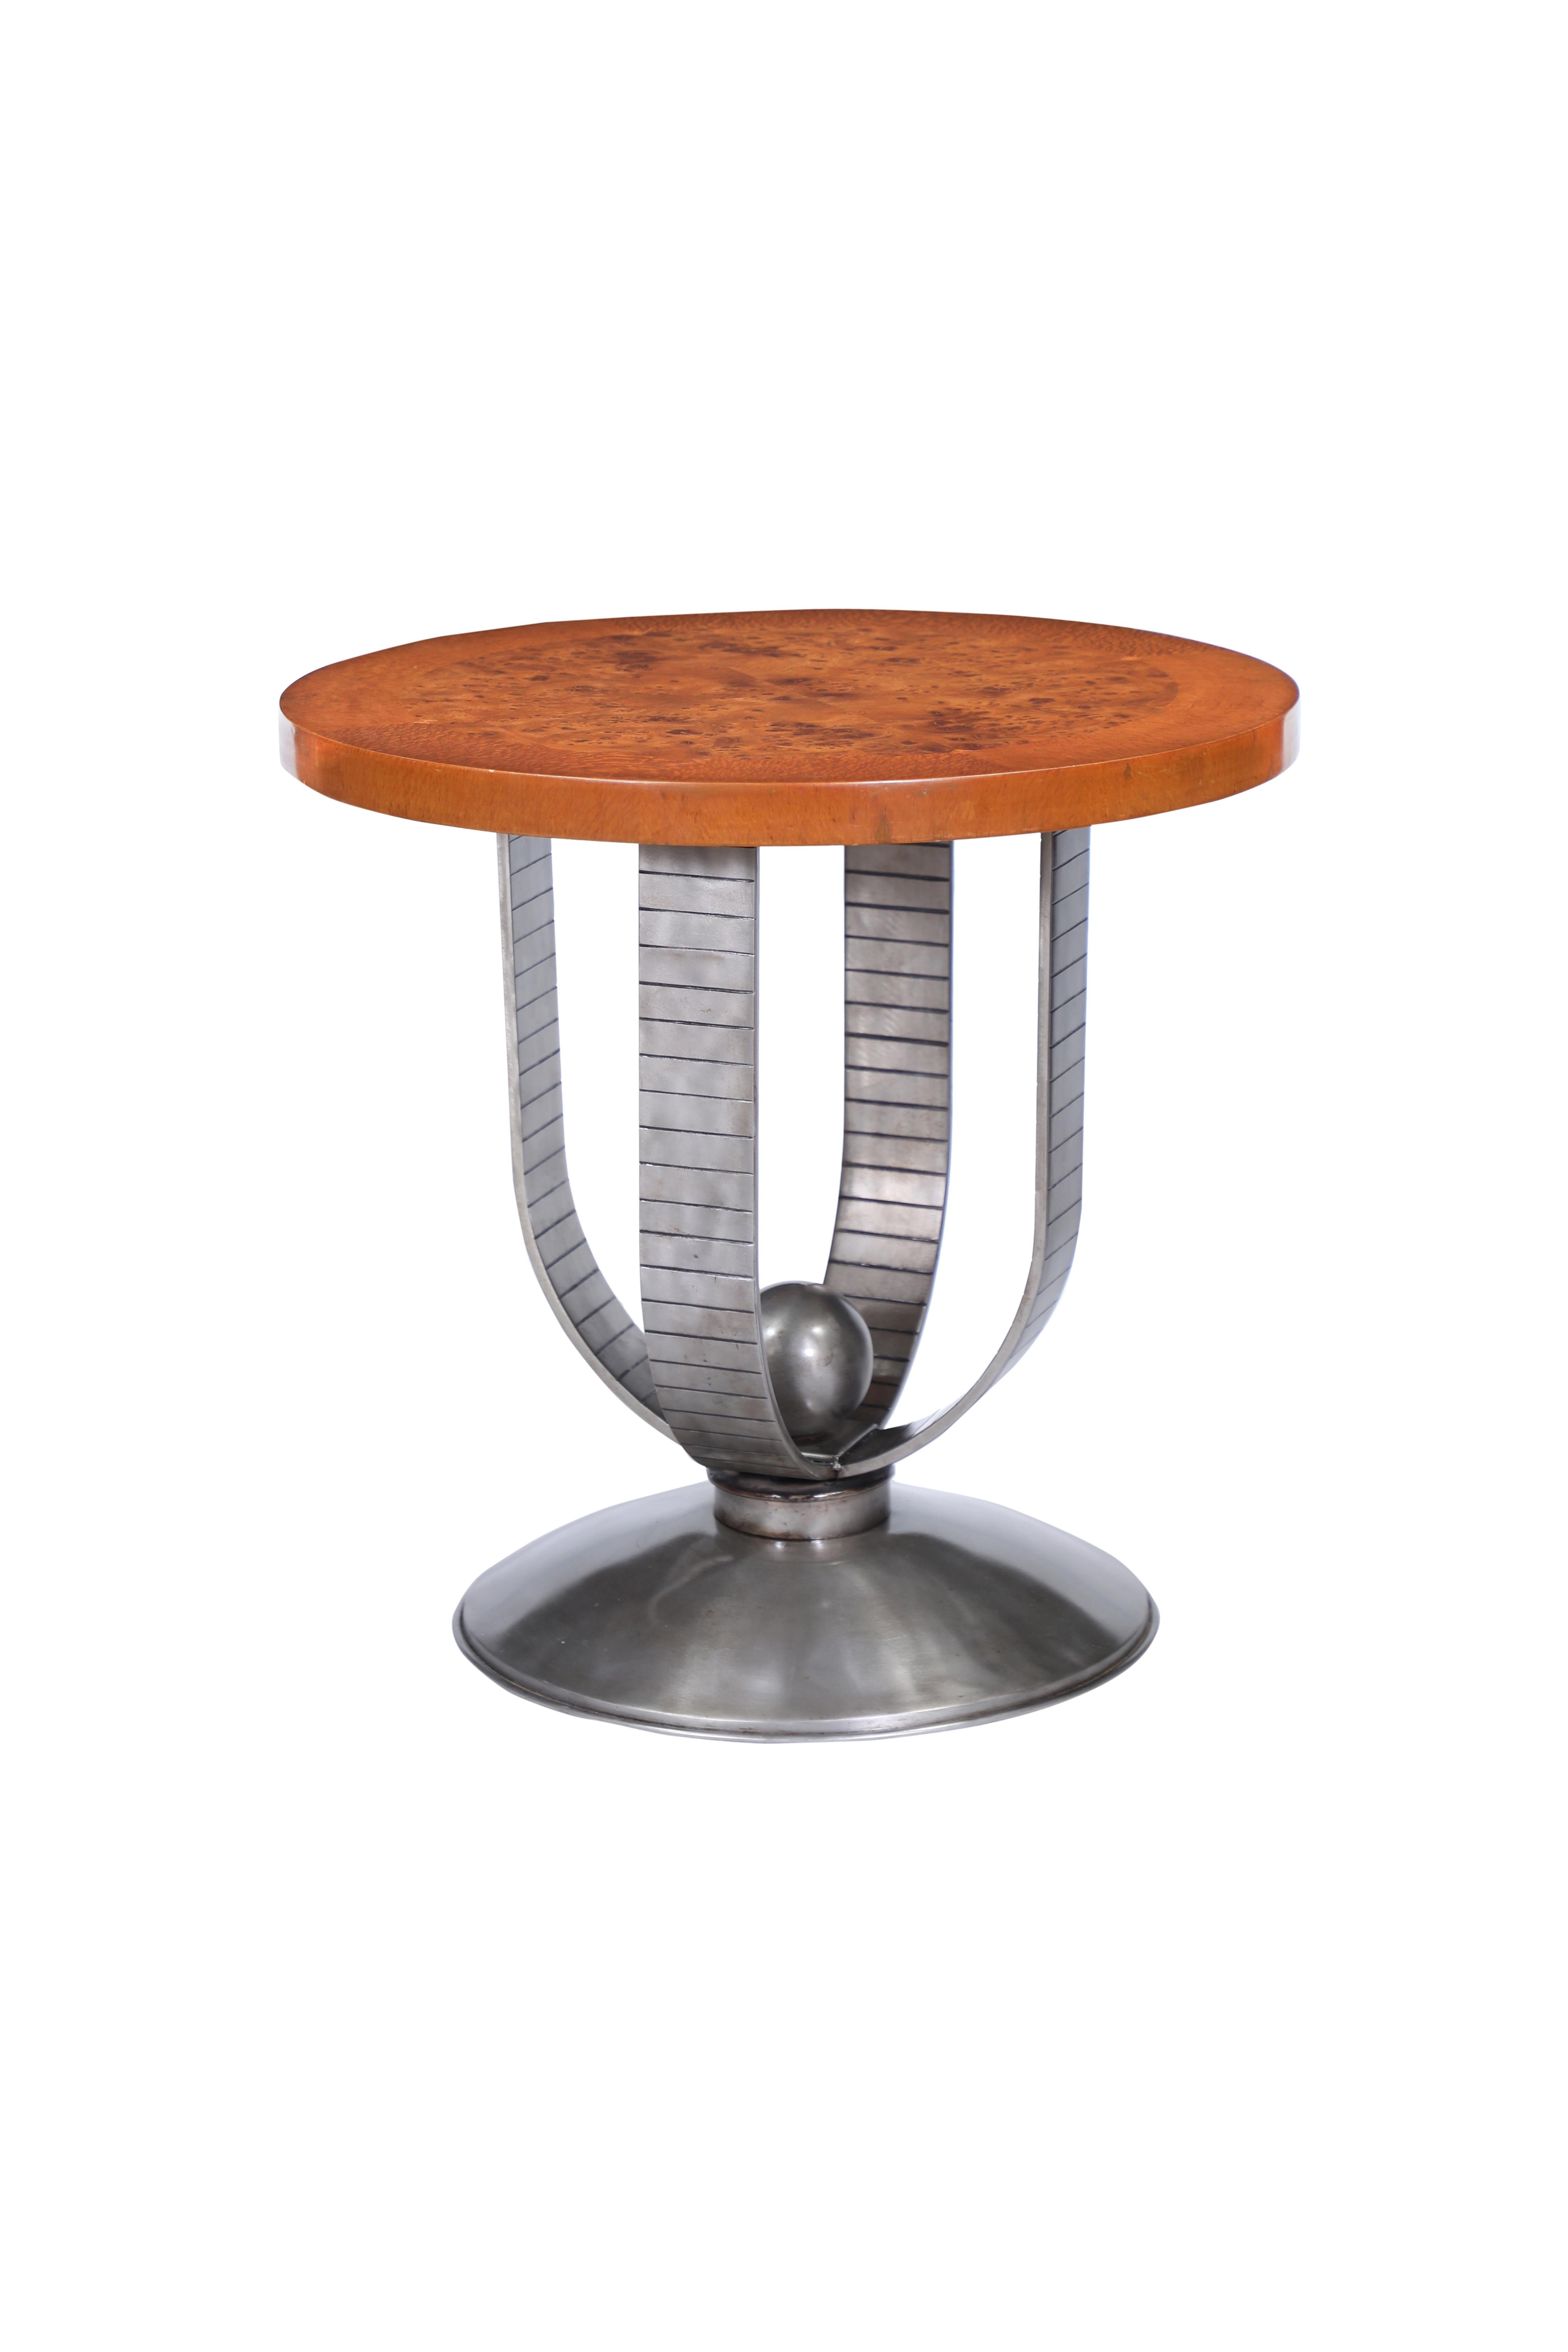 Finely crafted pair of Mid-Century Modern side tables featuring a double U-shaped chrome pedestal base.  The base has a linear embossed design both on the inside and outside with a ball center.  The top is an exquisite burl maple and when you look